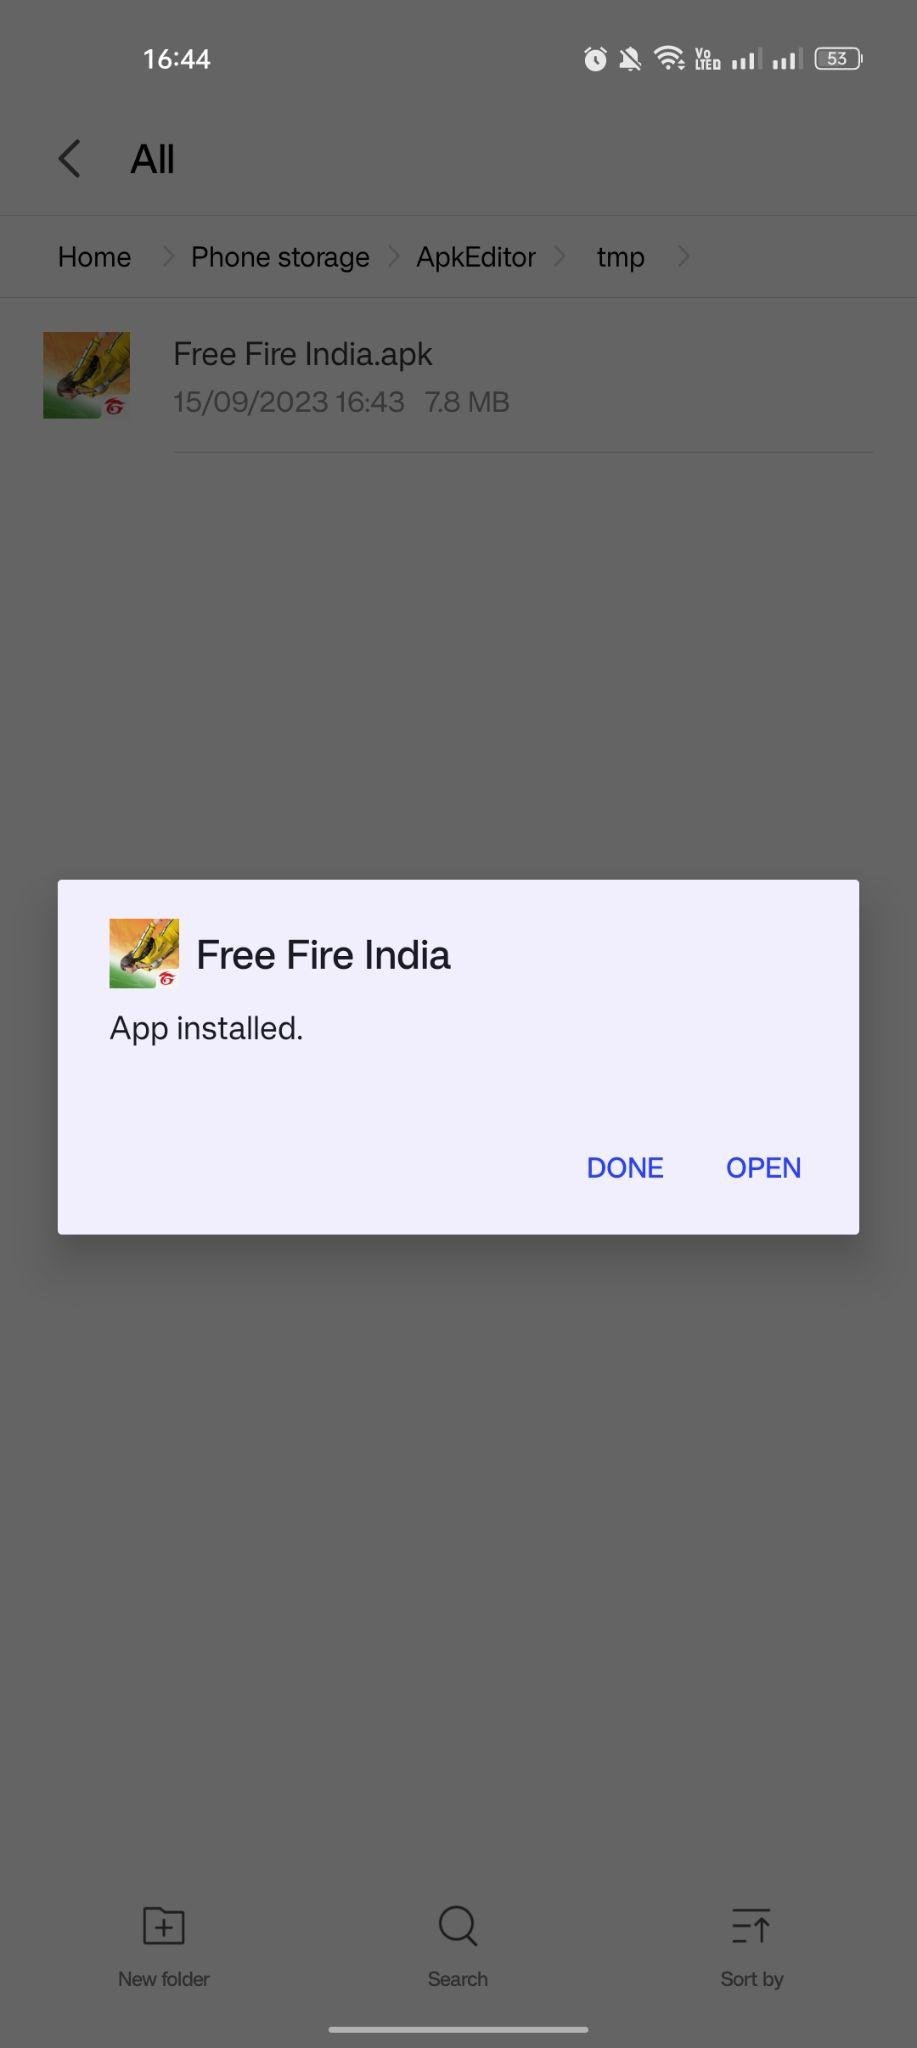 Free Fire India apk installed